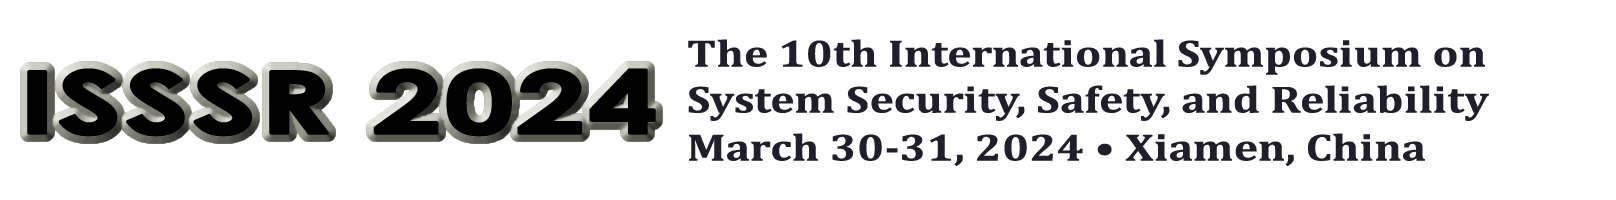 ISSSR 2024 March 30-31, 2024 in Xiamen, China. The 10th International Symposium on System and Software Reliability.